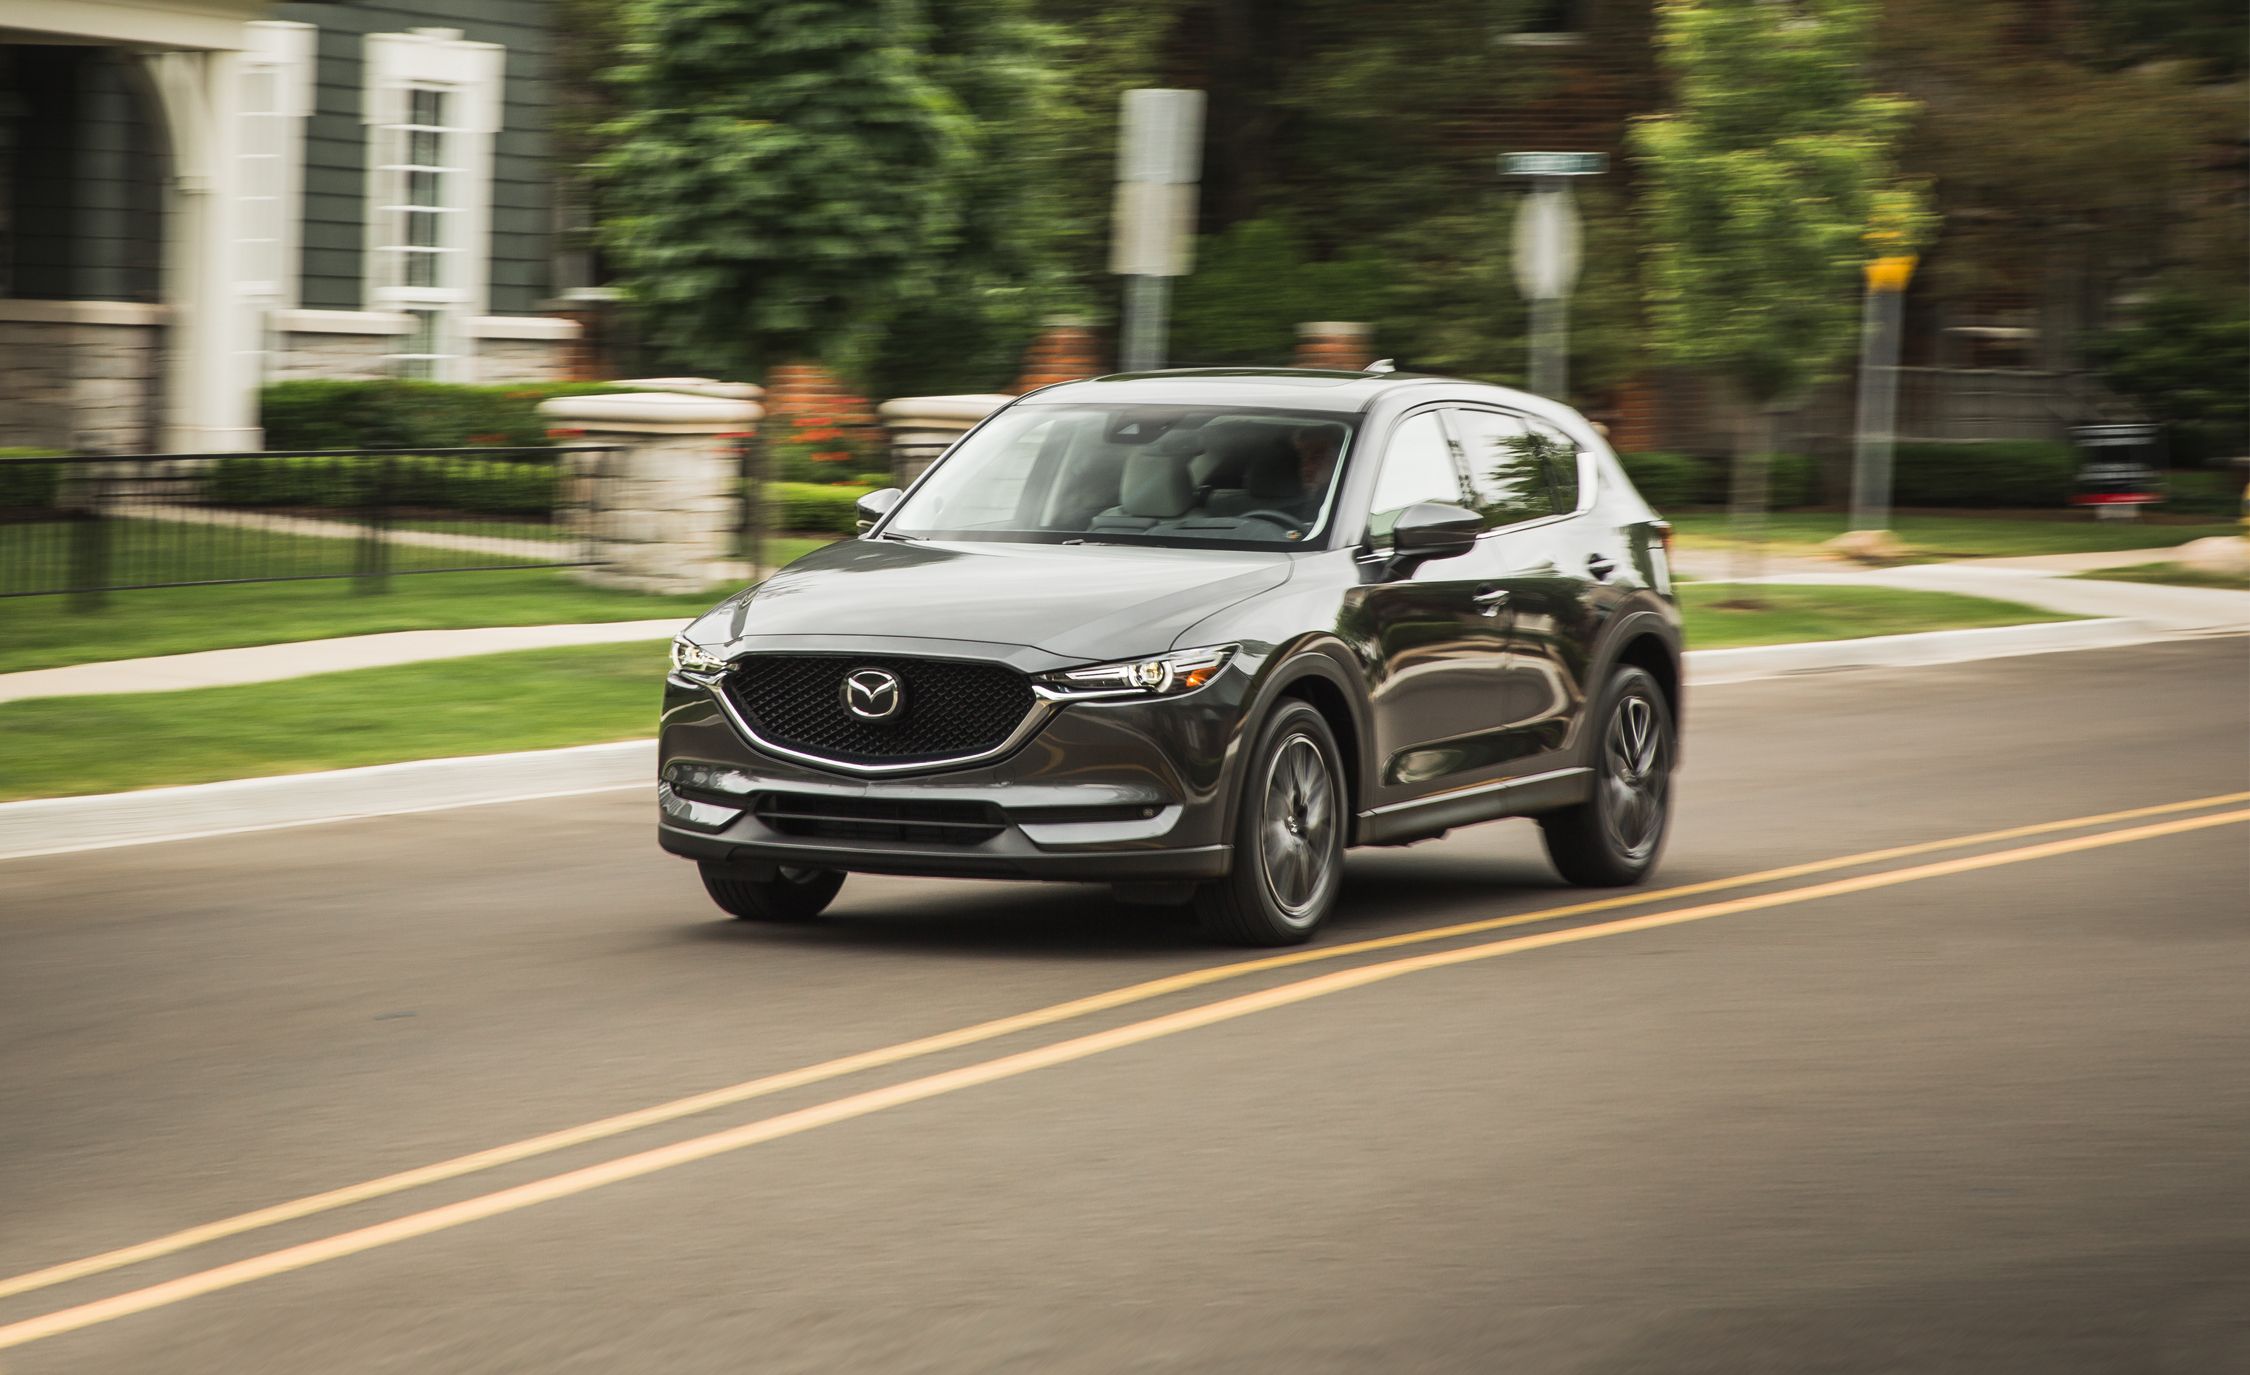 2017 Mazda CX-5 FWD Test | Review | Car and Driver